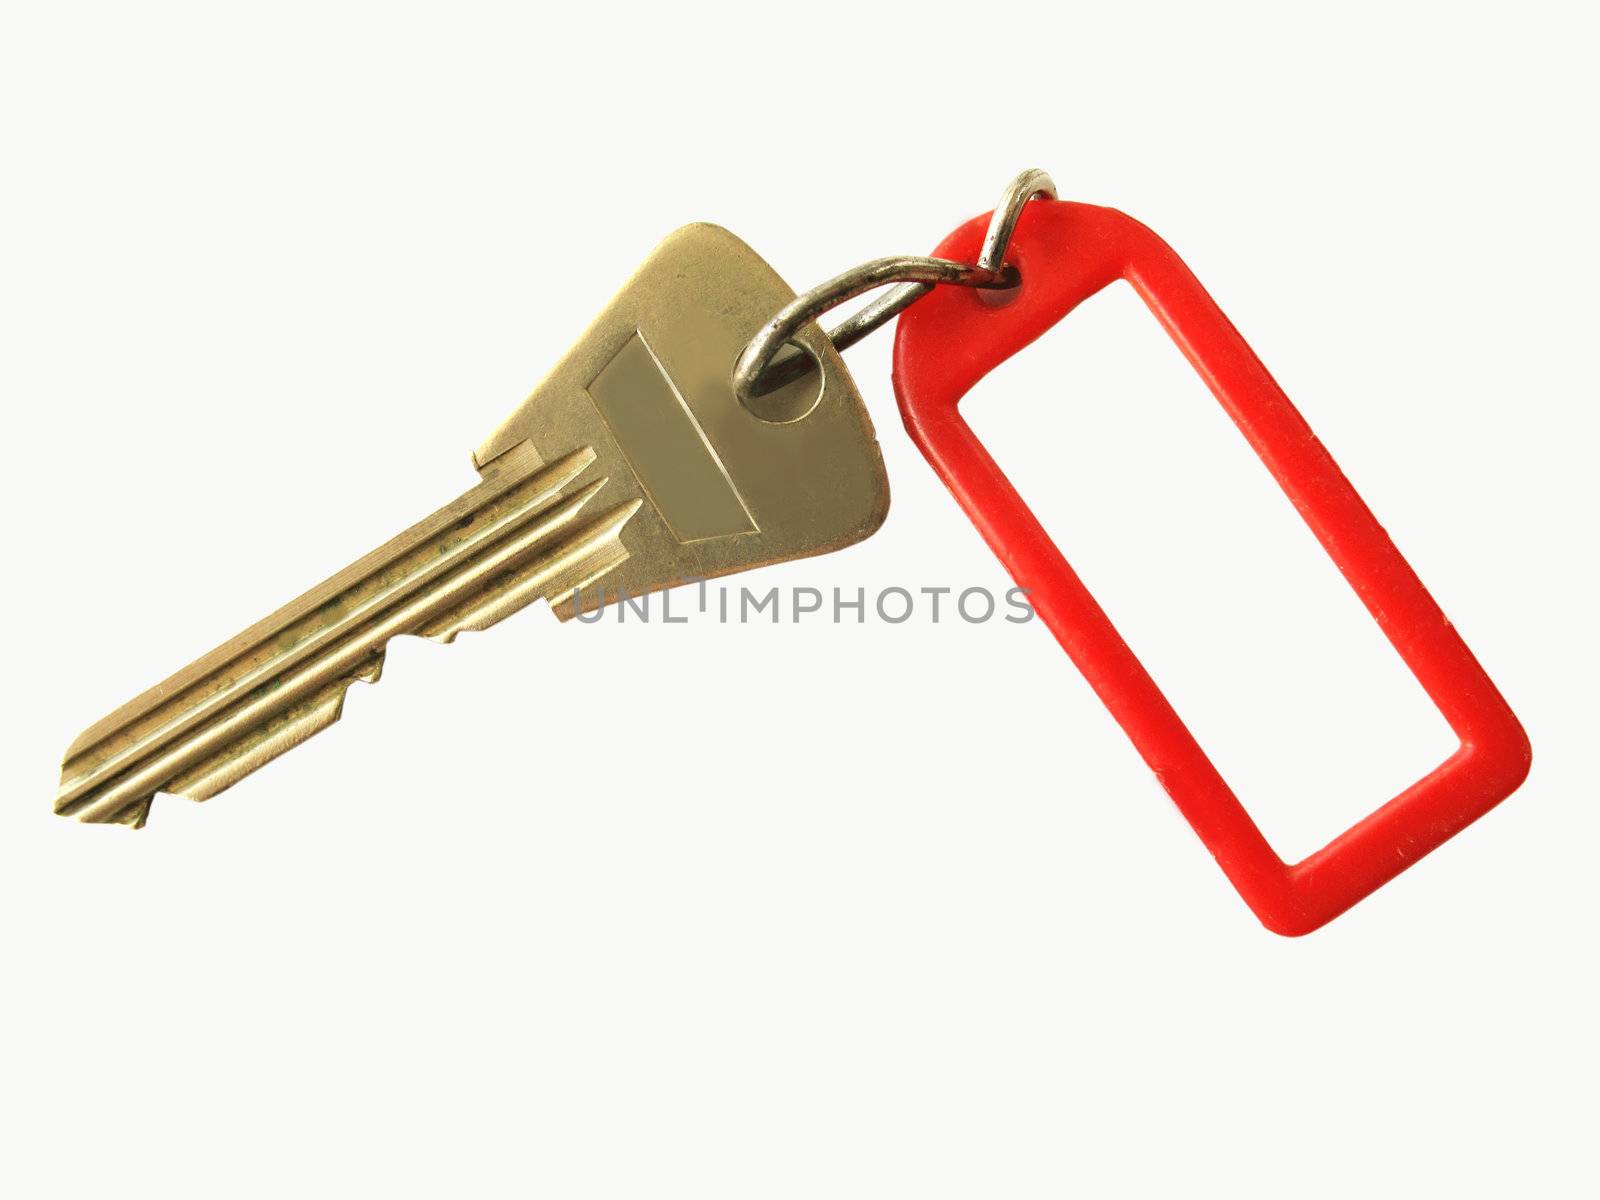  Key with label isolated on the white                              